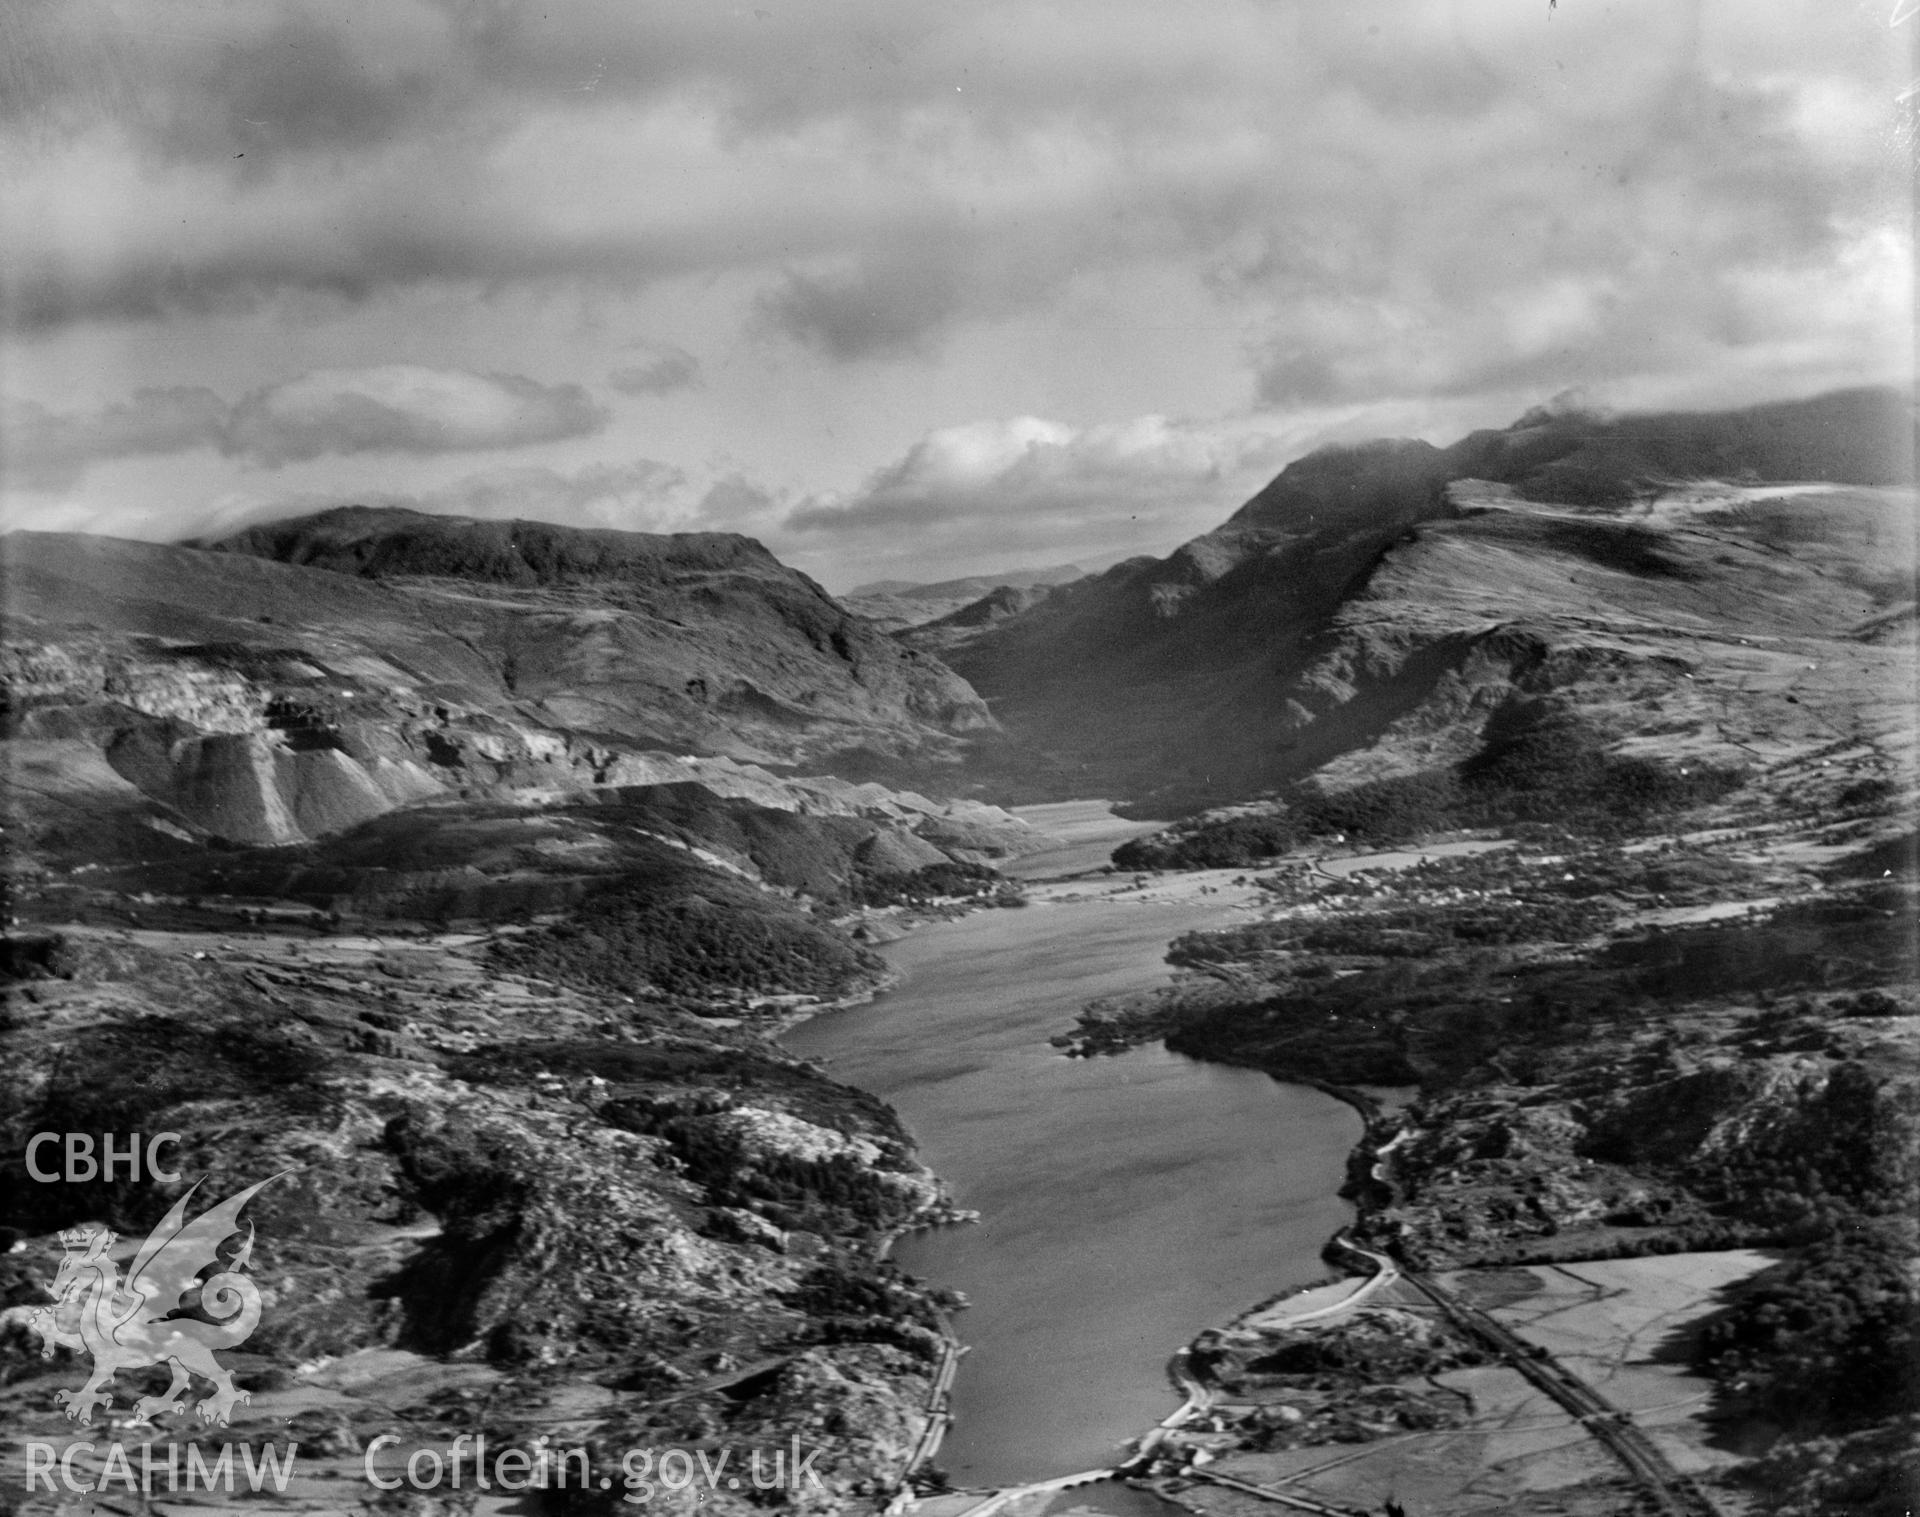 Distant view of Llanberis showing lake and mountains, oblique aerial view. 5?x4? black and white glass plate negative.